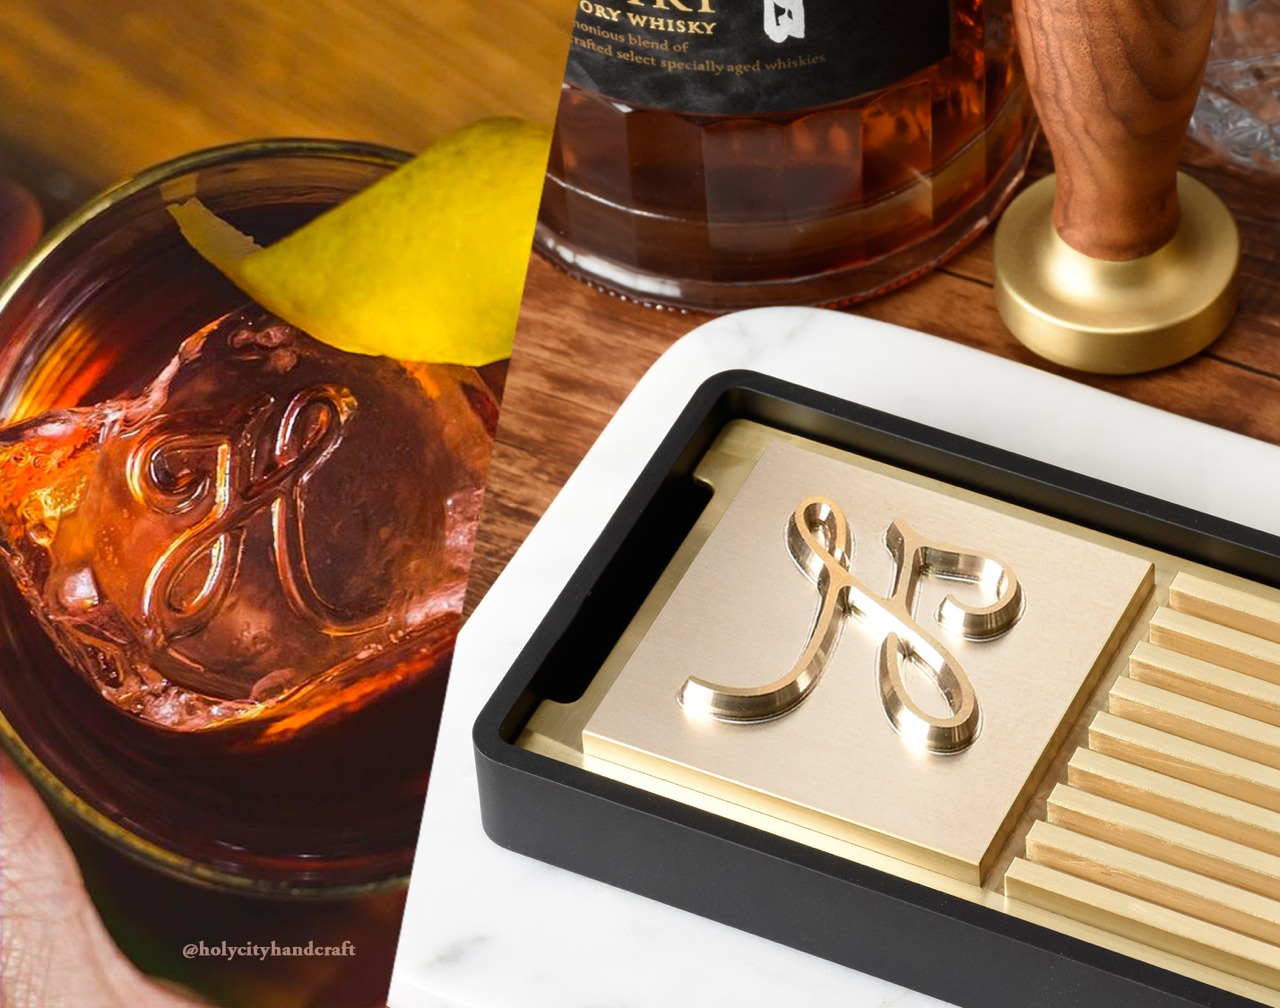 https://www.yankodesign.com/images/design_news/2022/12/this-ice-embosser-lets-you-completely-upgrade-your-cocktail-game-with-custom-branded-ice-cubes/create_your_own_custom-branded_ice_cubes_3.jpg